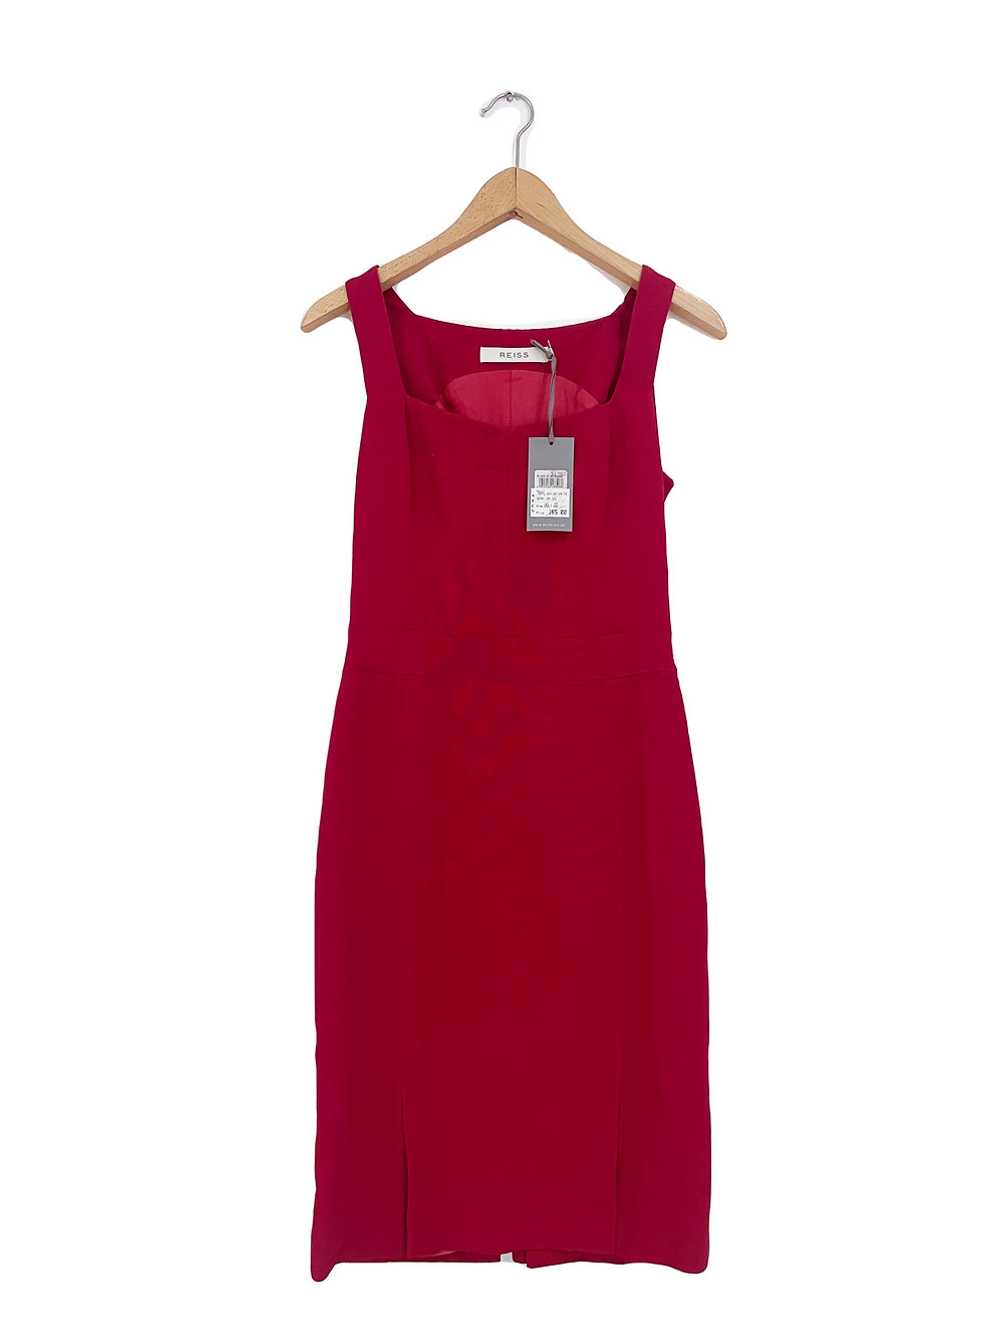 New With Tags Reiss Milly Dress UK 6 - image 1